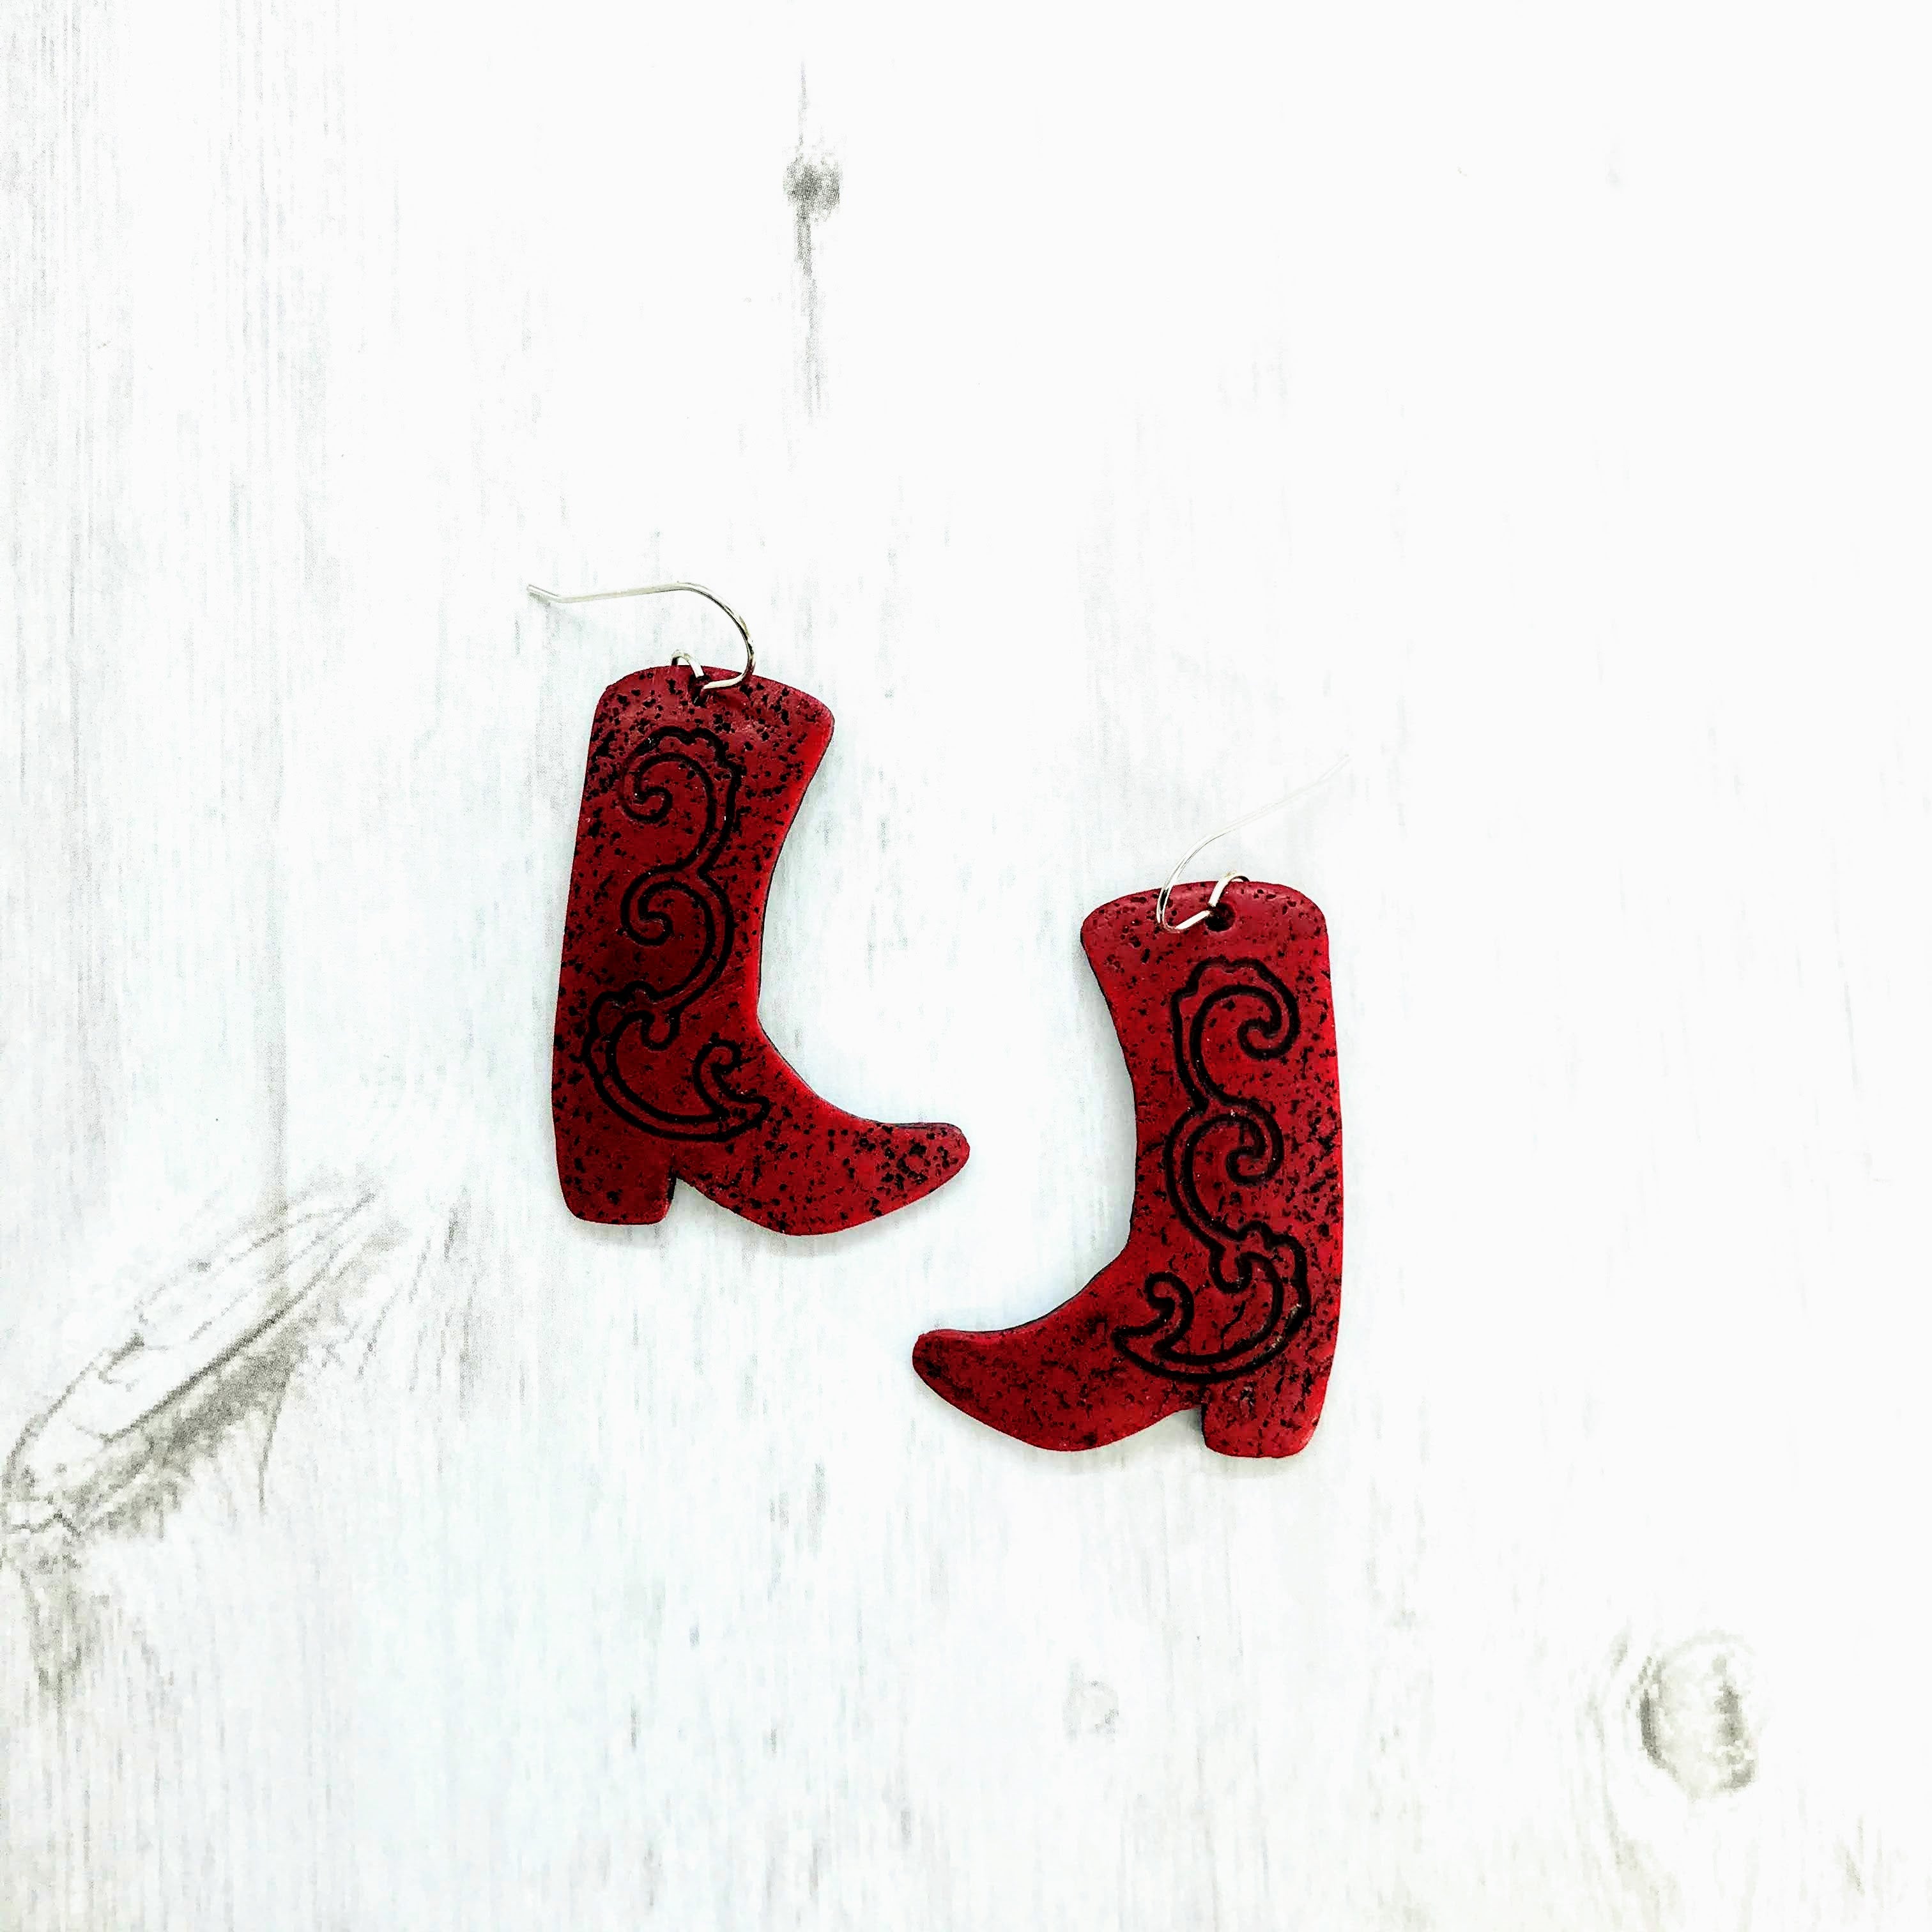 The Boots, Red